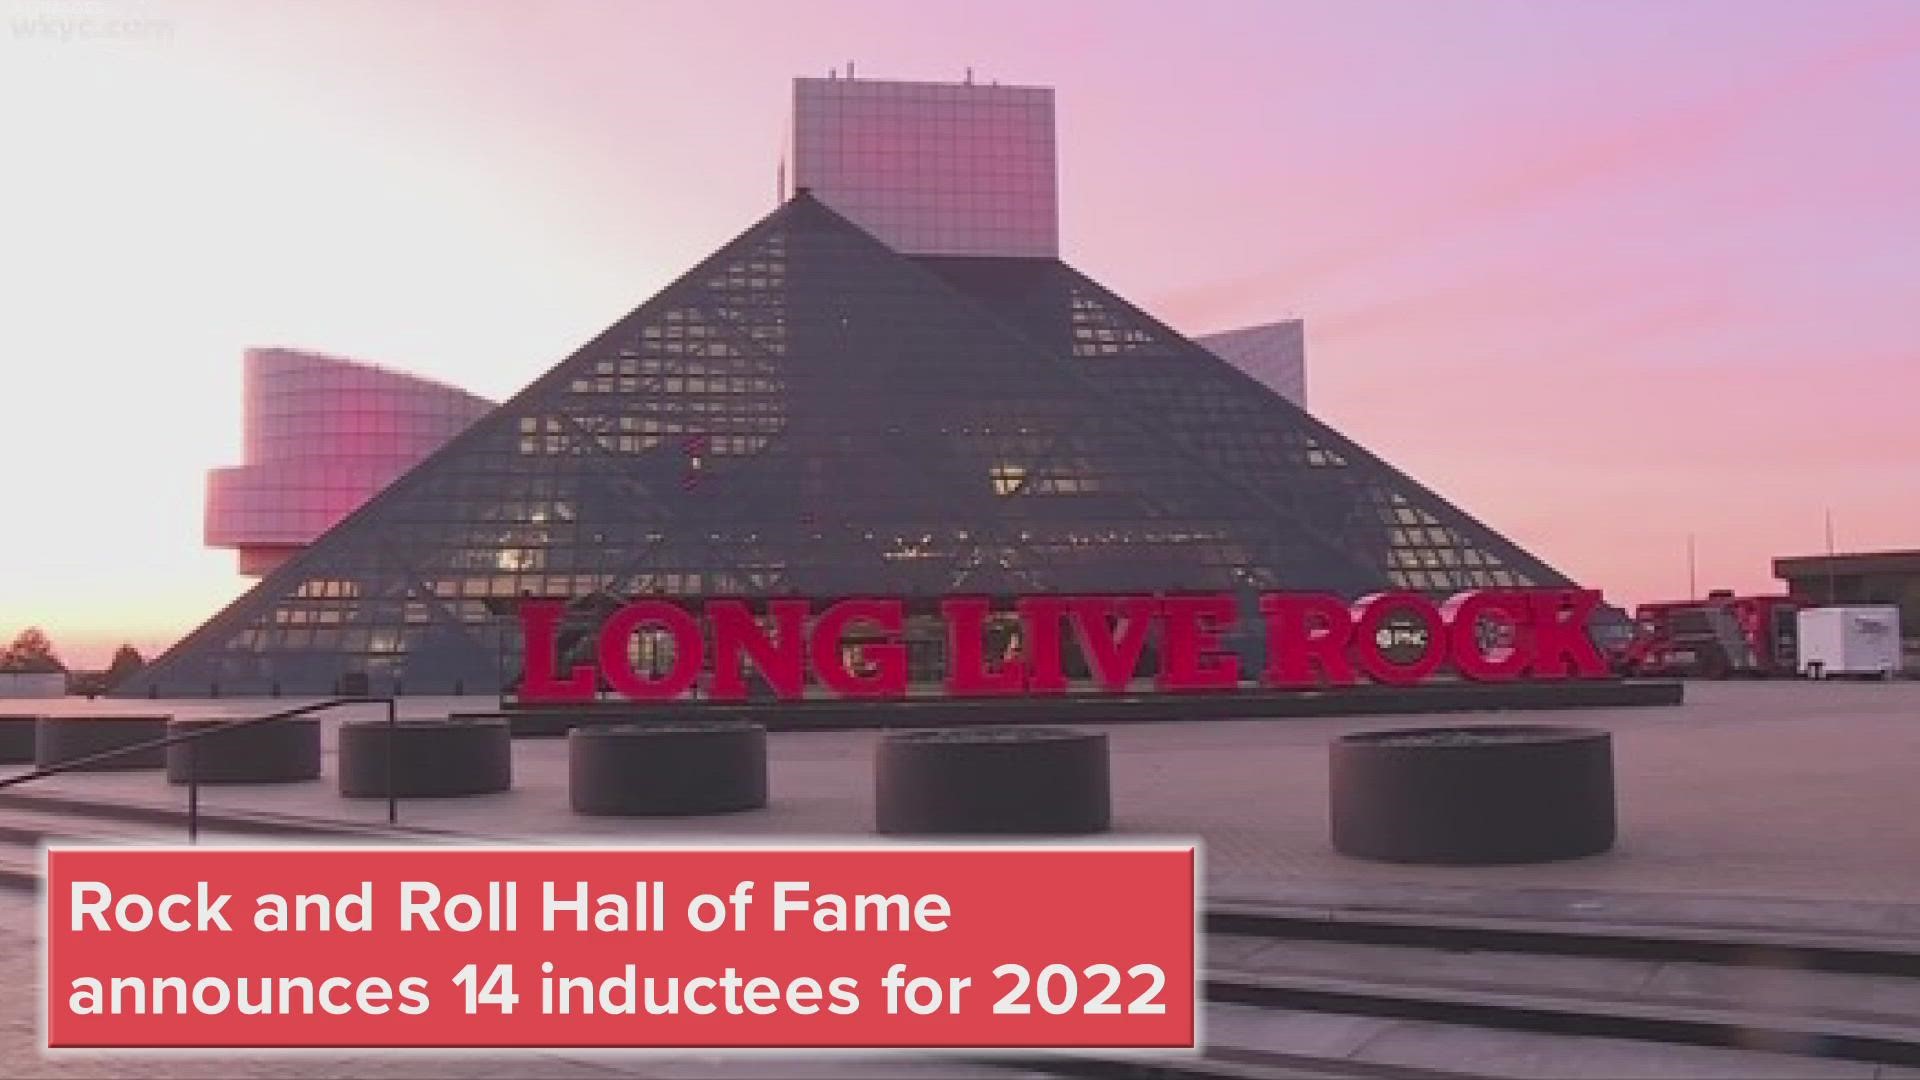 The 2022 Rock and Roll Hall of Fame induction ceremony will be held at the Microsoft Theater in Los Angeles on Saturday, Nov. 5.